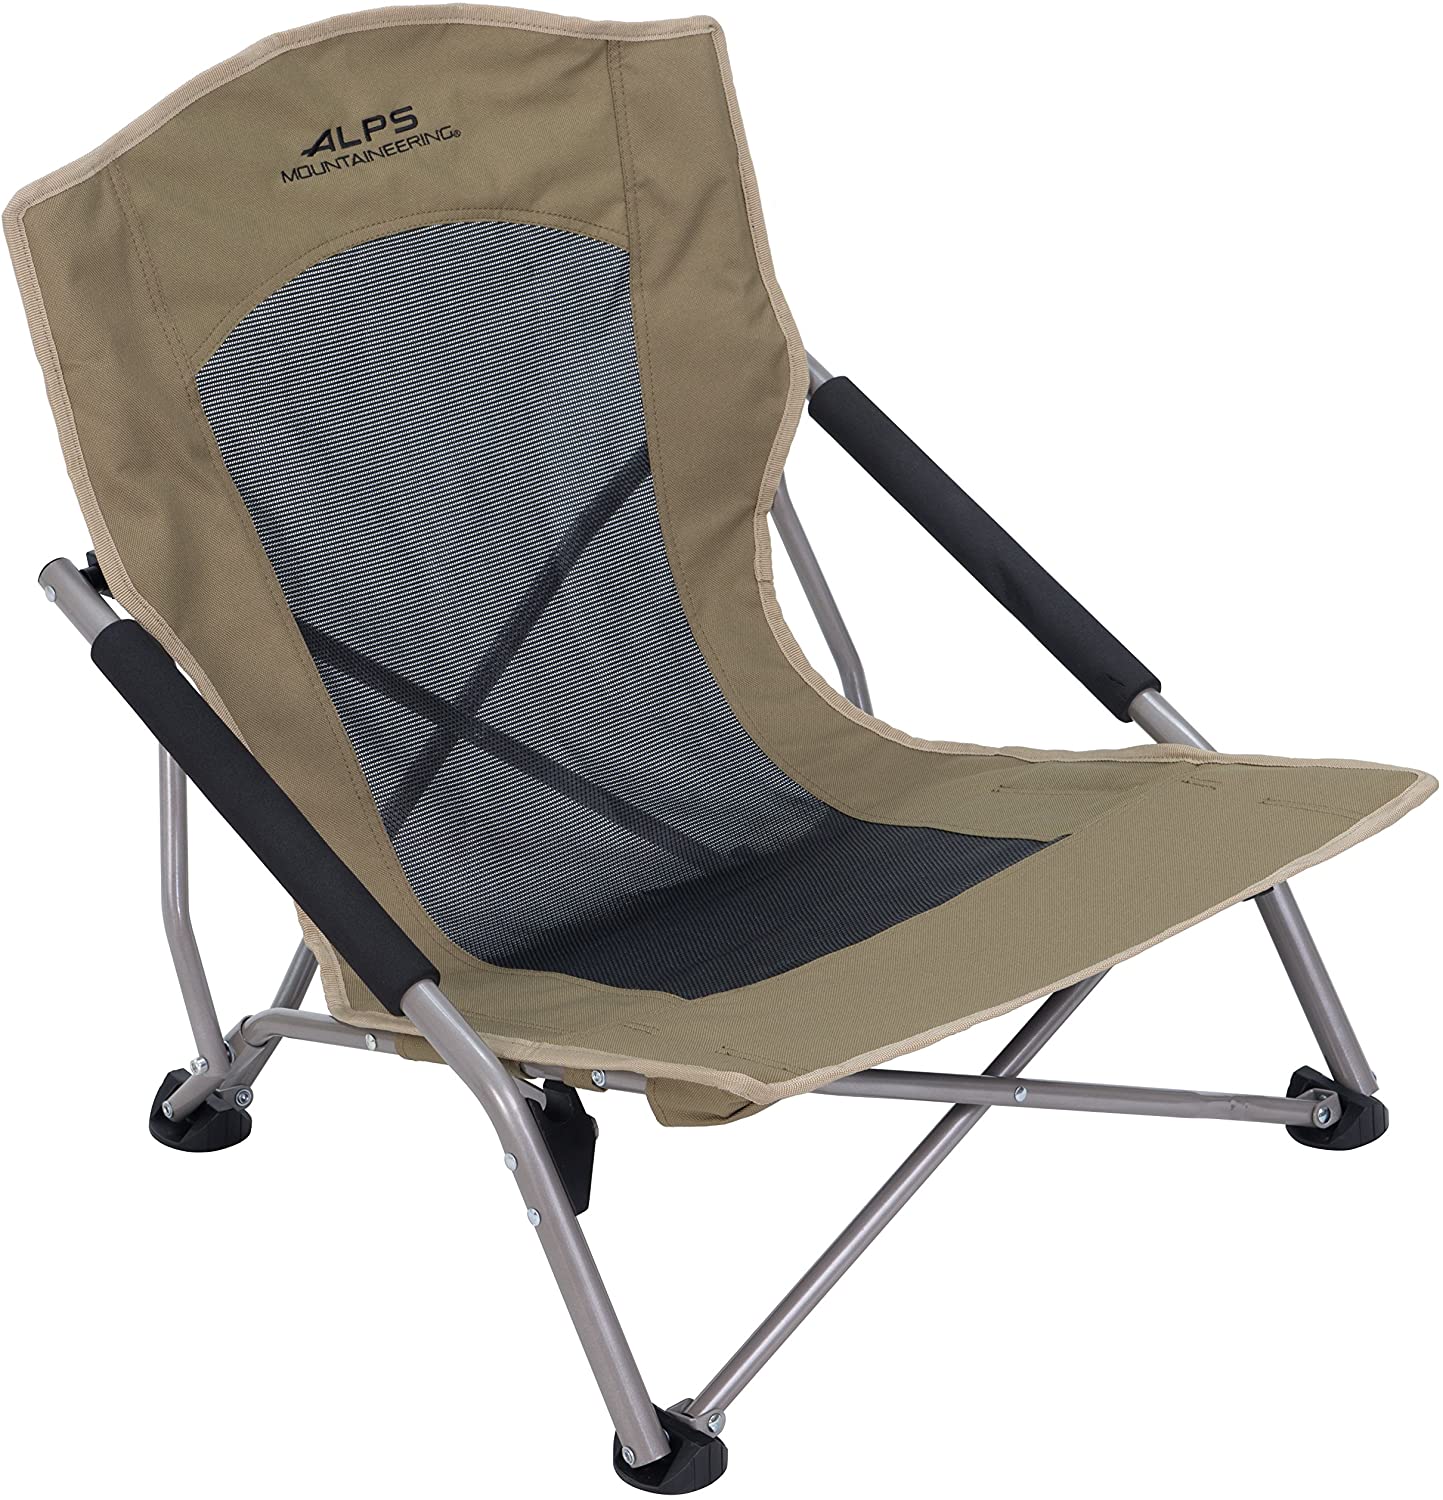 Alps Mountaineering Rendezvous Chair Render Cropped